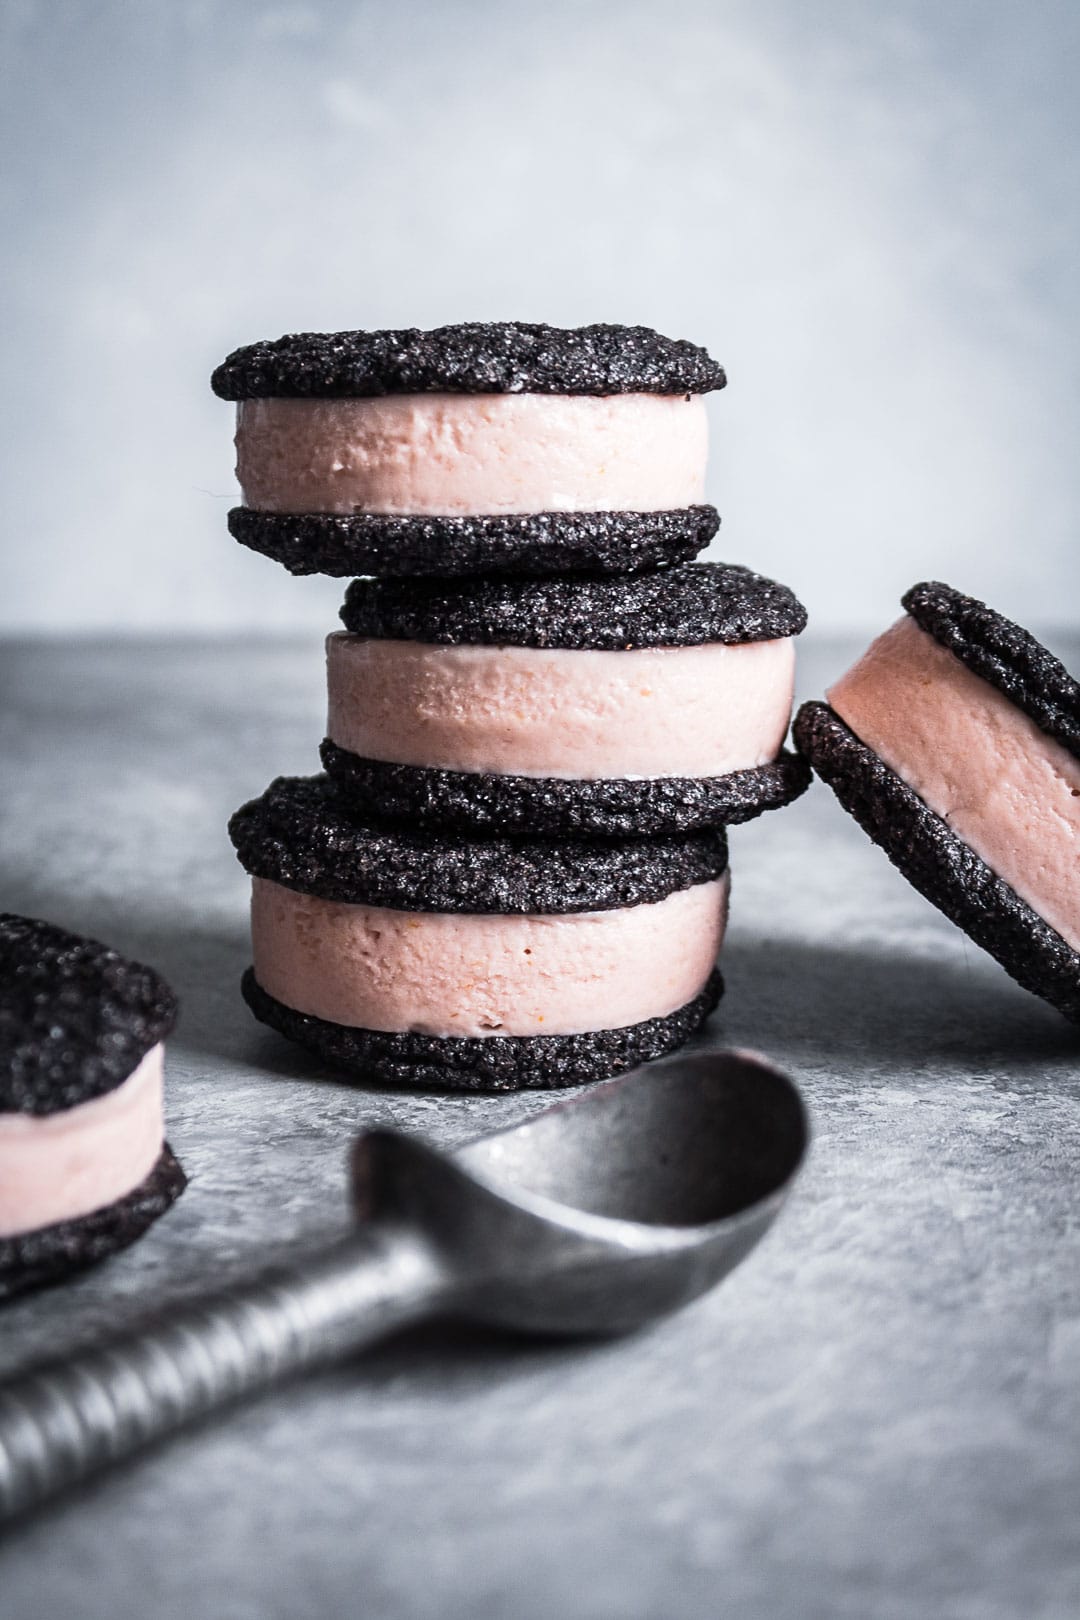 Stack of three ice cream sandwiches with others nearby and ice cream scoop in foreground on grey background